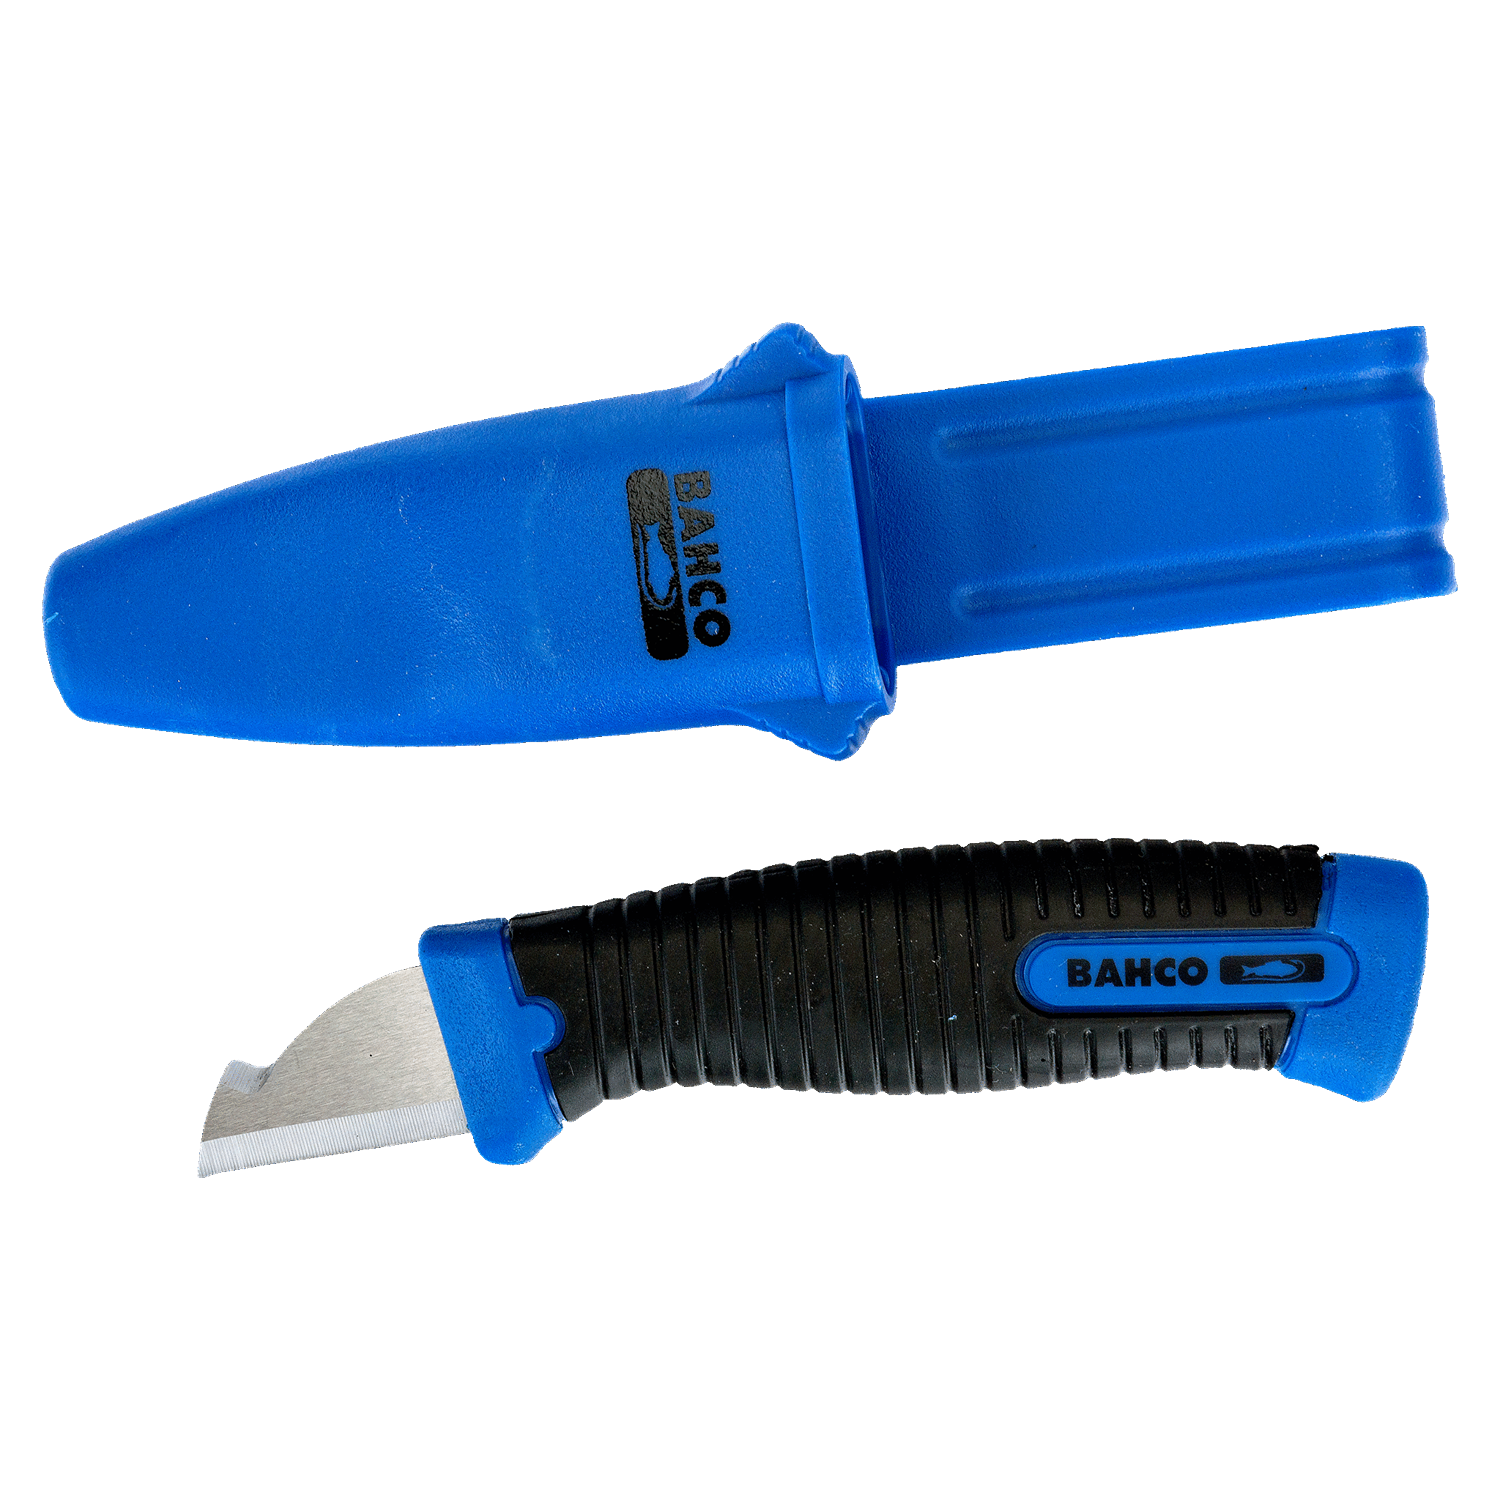 BAHCO 2446-ELL Electrician Tradesman Knife for Left Hand Use - Premium Electrician Tradesman Knife from BAHCO - Shop now at Yew Aik.